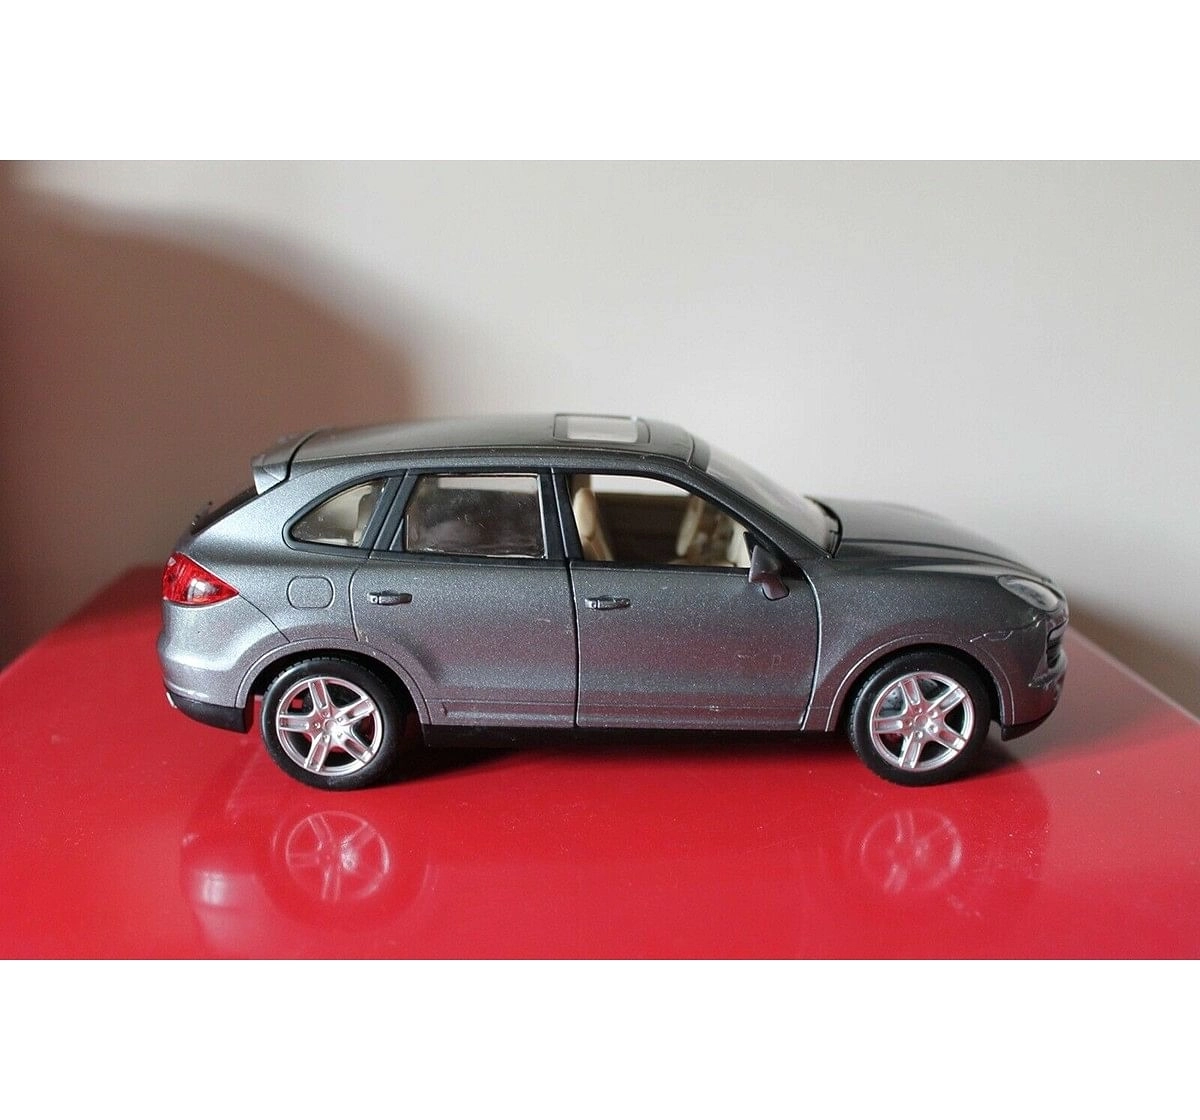  MSZ 1:24 Die Cast Porsche Cayenne Car with Light and Sound for Kids age 3Y+ (Silver)